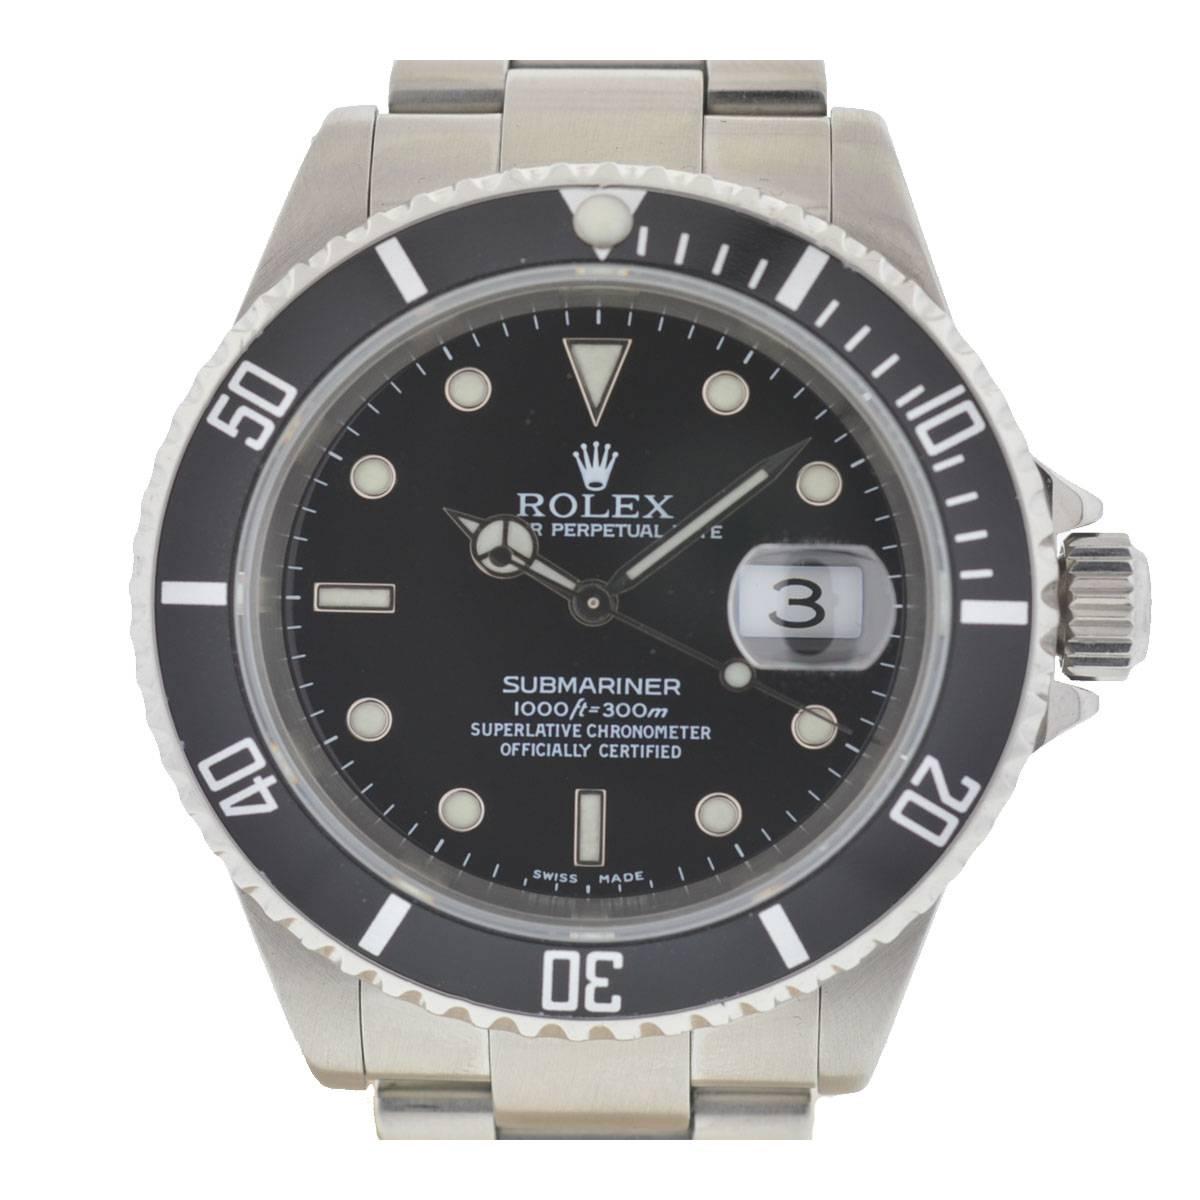 Company-Rolex
Model-Rolex 16610 Submariner
Case Metal-Stainless Steel
Case Measurement-40mm
Bracelet-Stainless Steel - Fits up to a 6.75